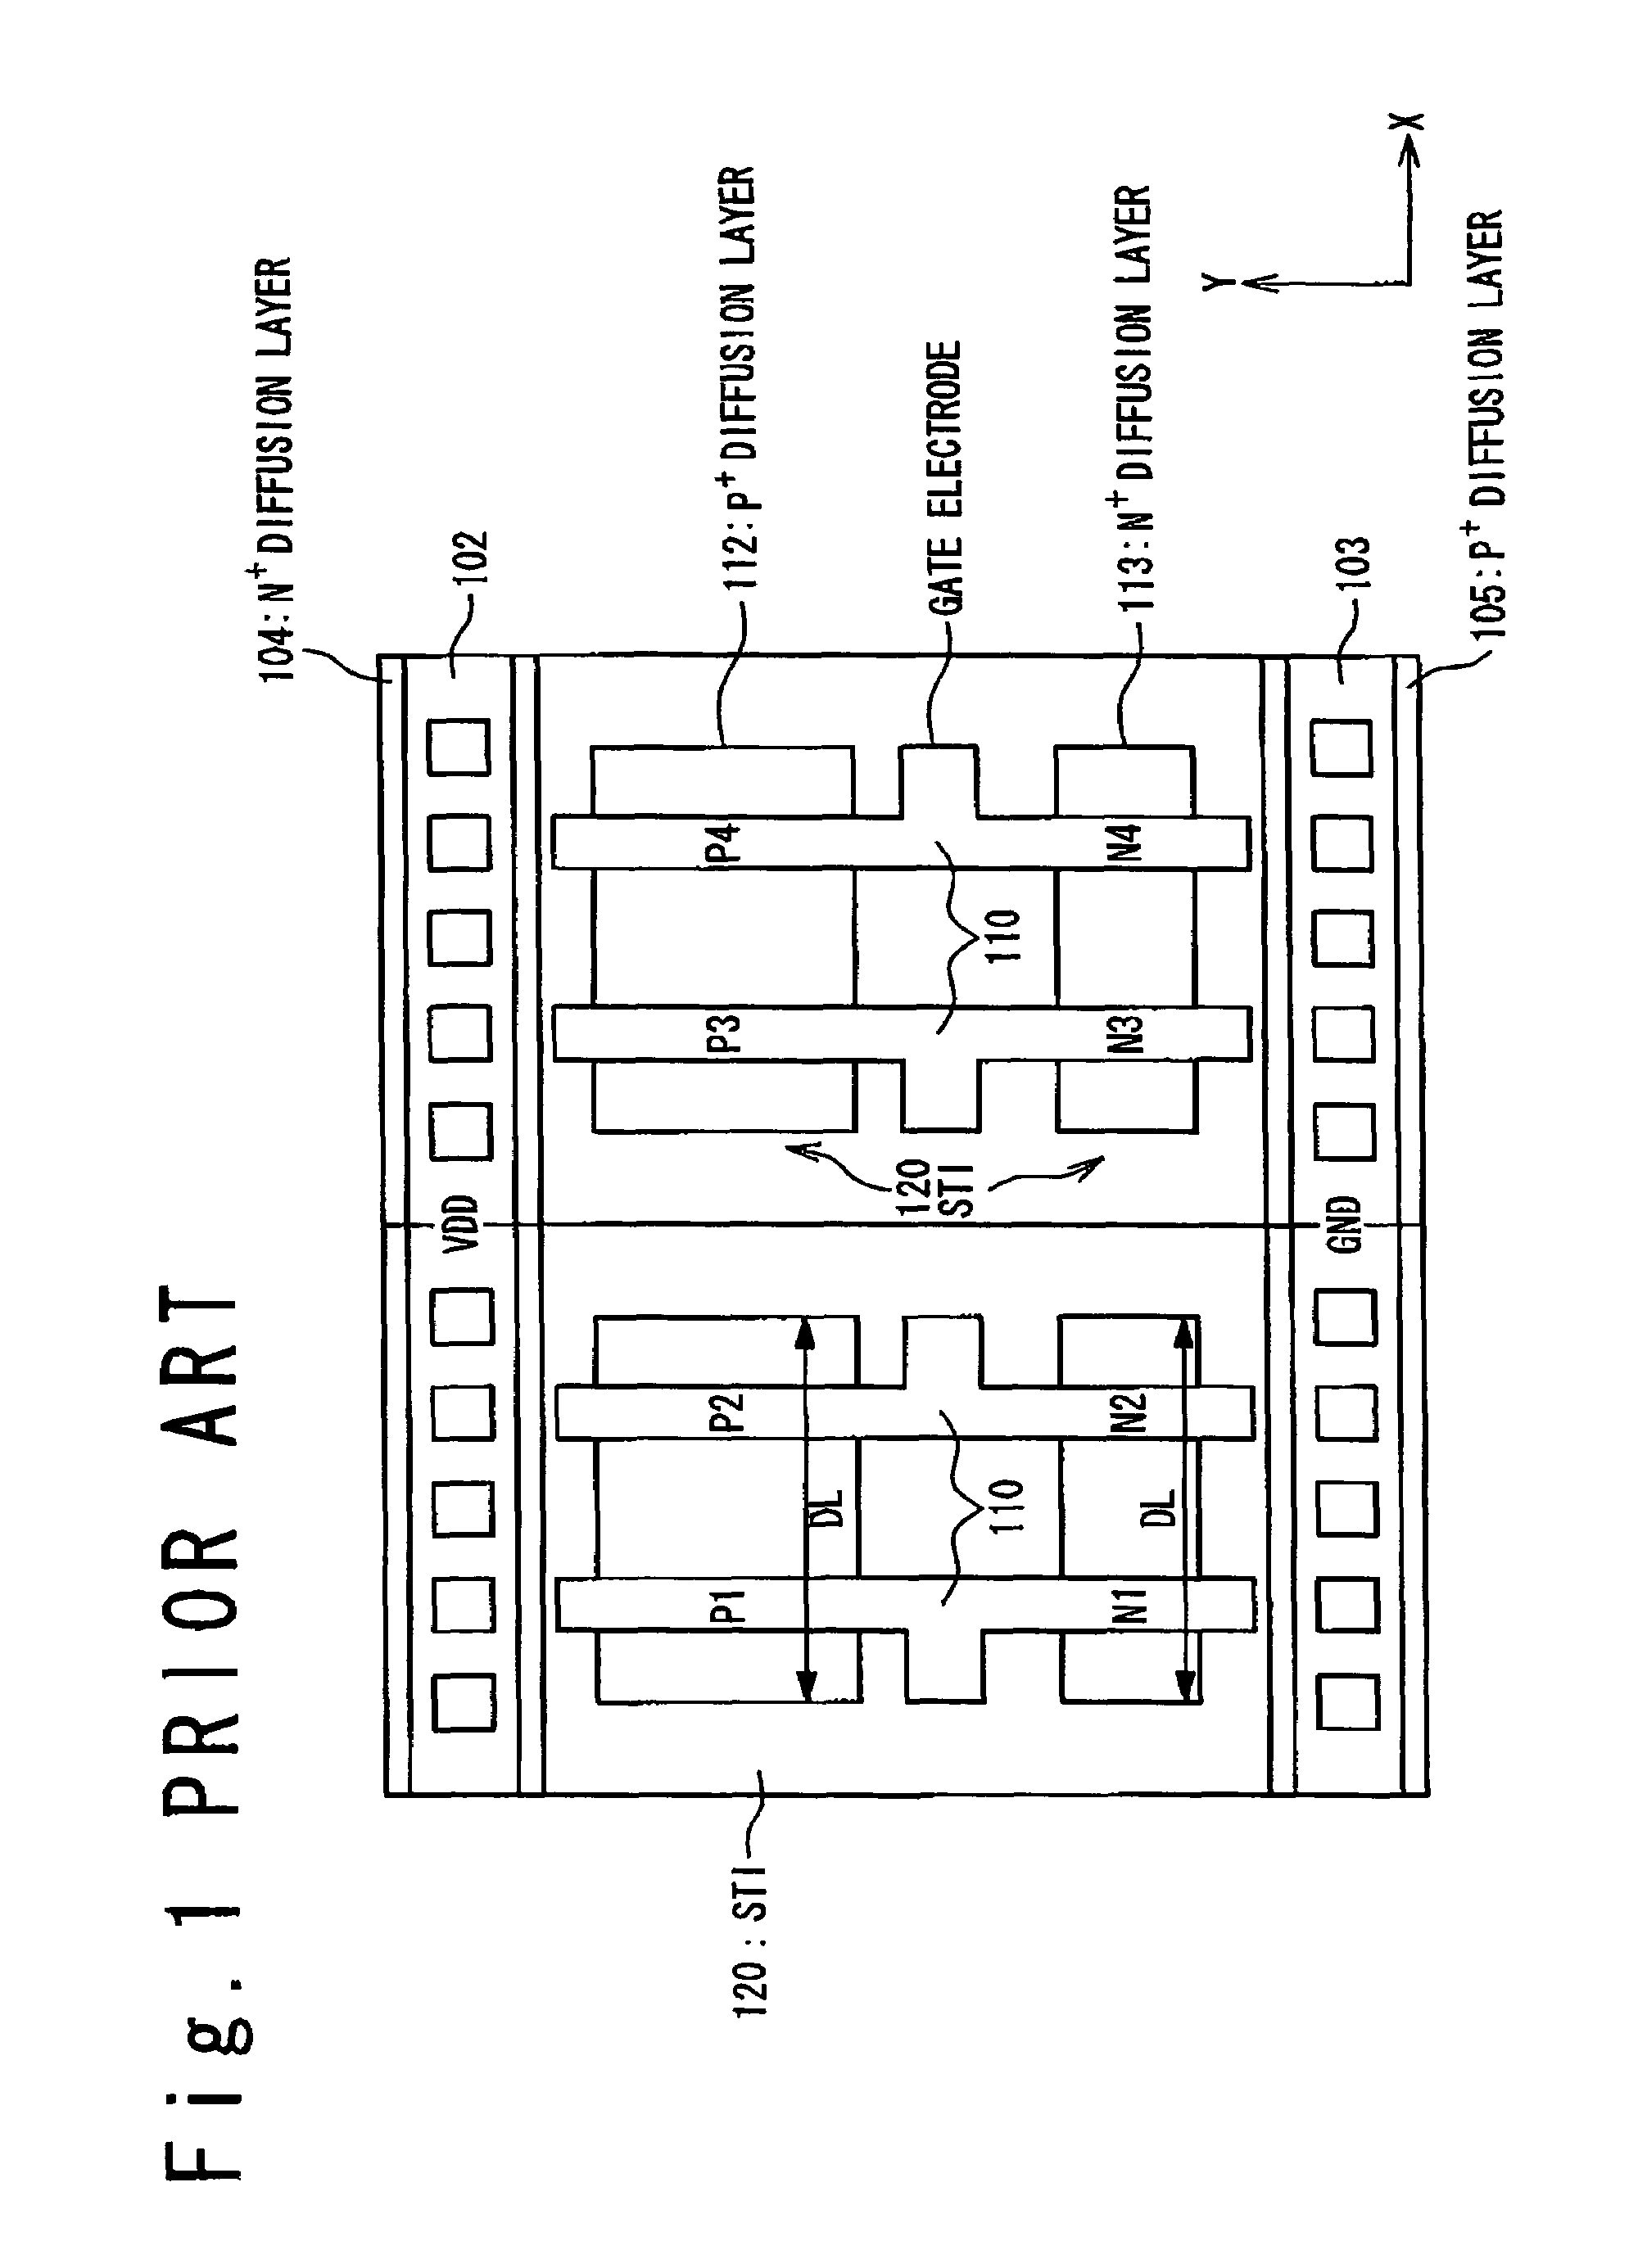 Semiconductor device with NMOS transistors arranged continuously